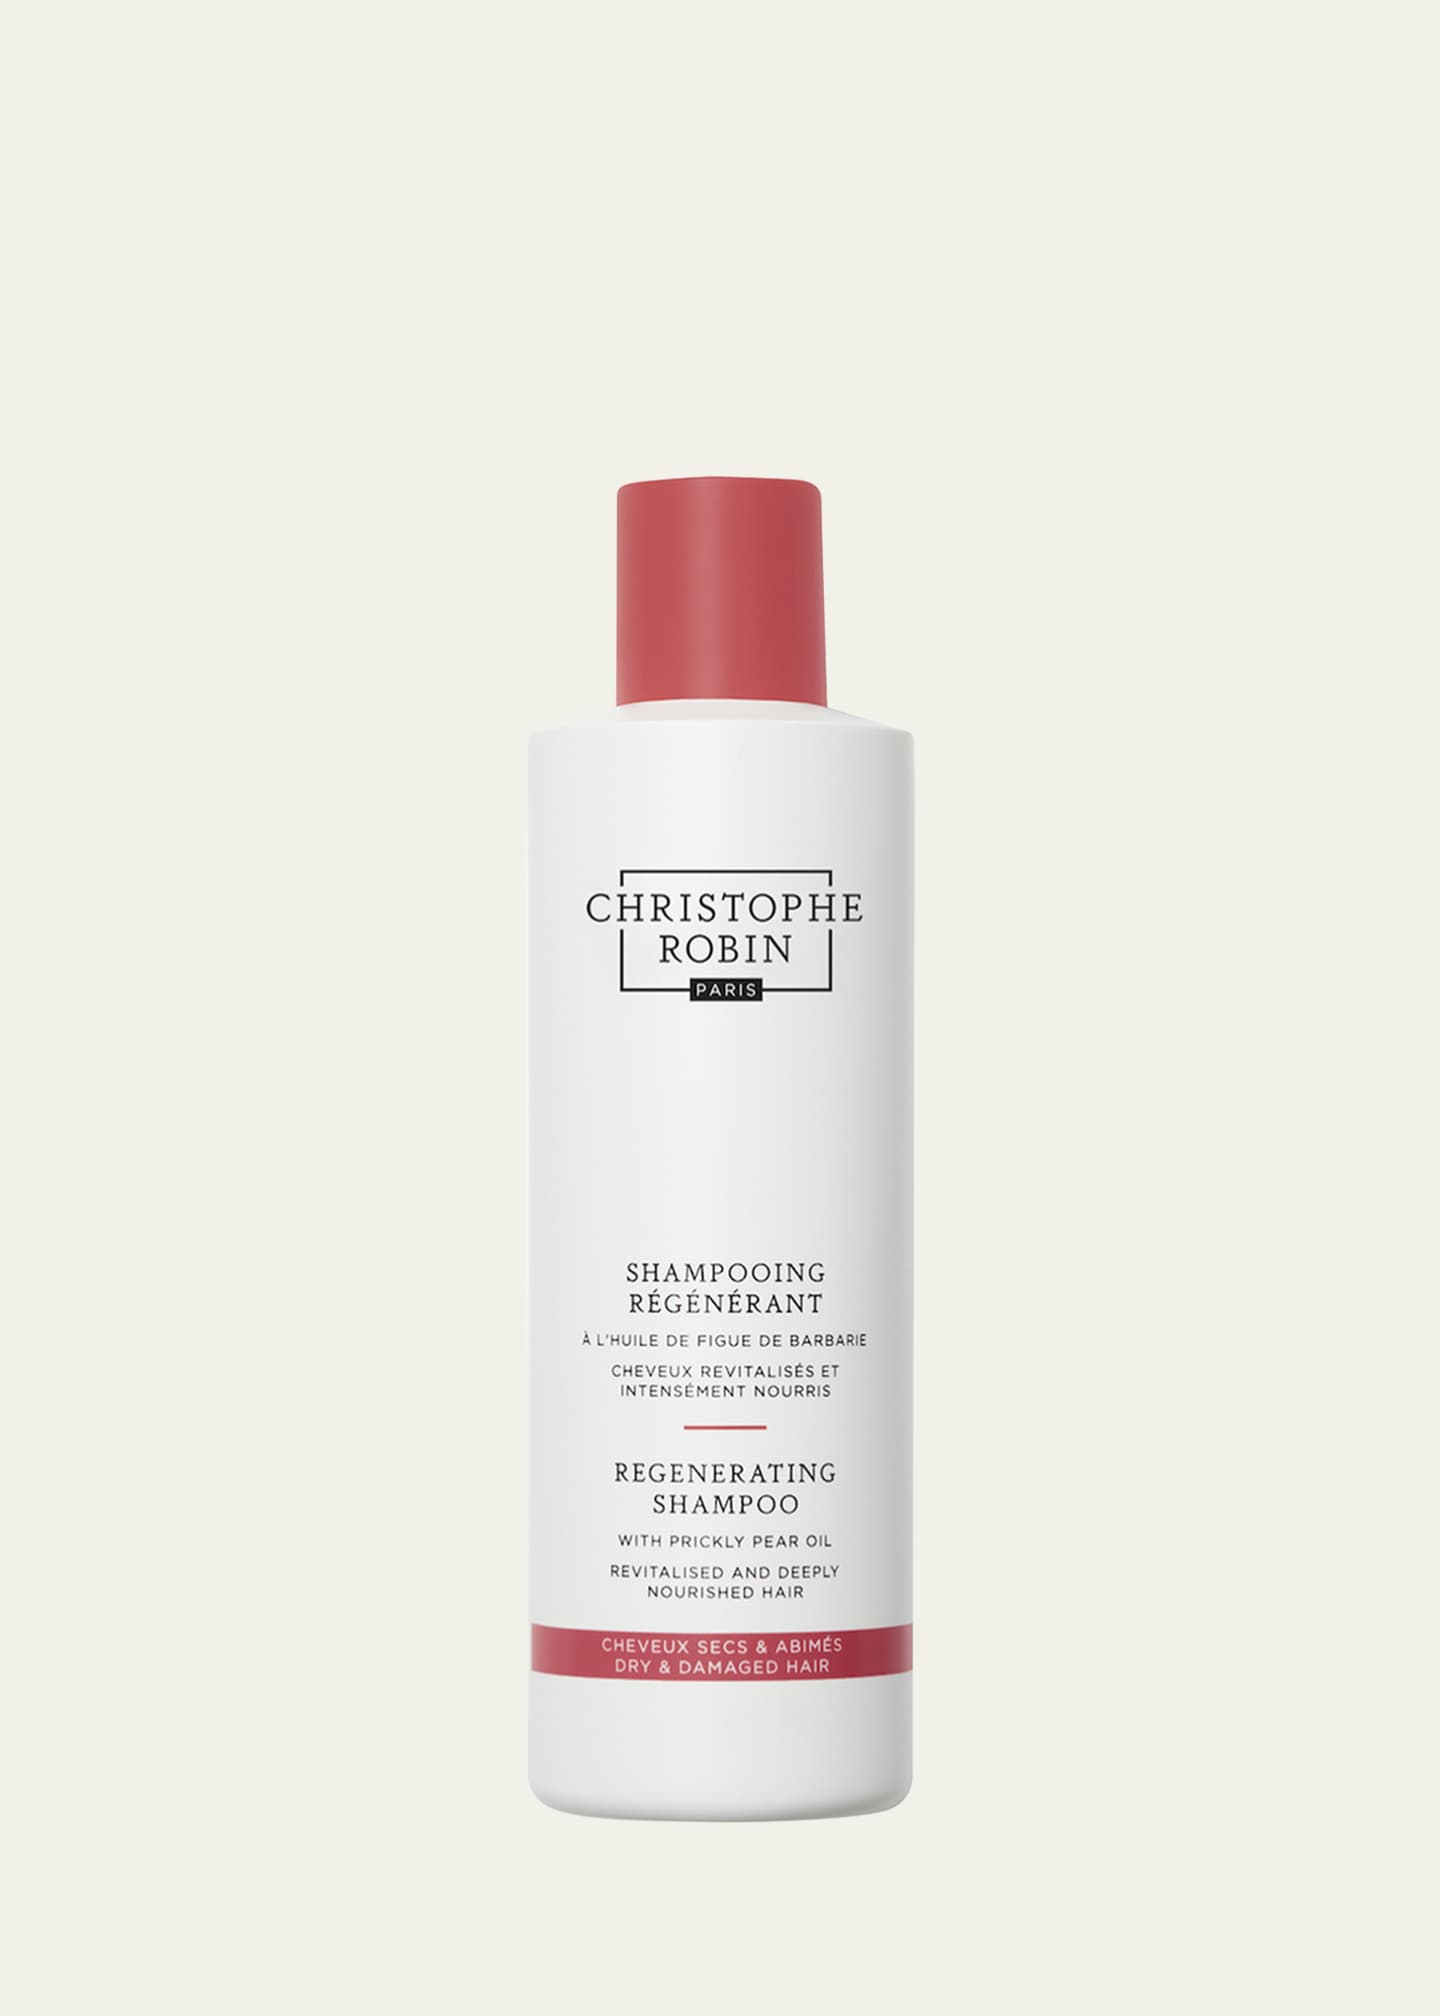 Christophe Robin 8.4 oz. Regenerating Shampoo with Prickly Pear Oil Image 1 of 5